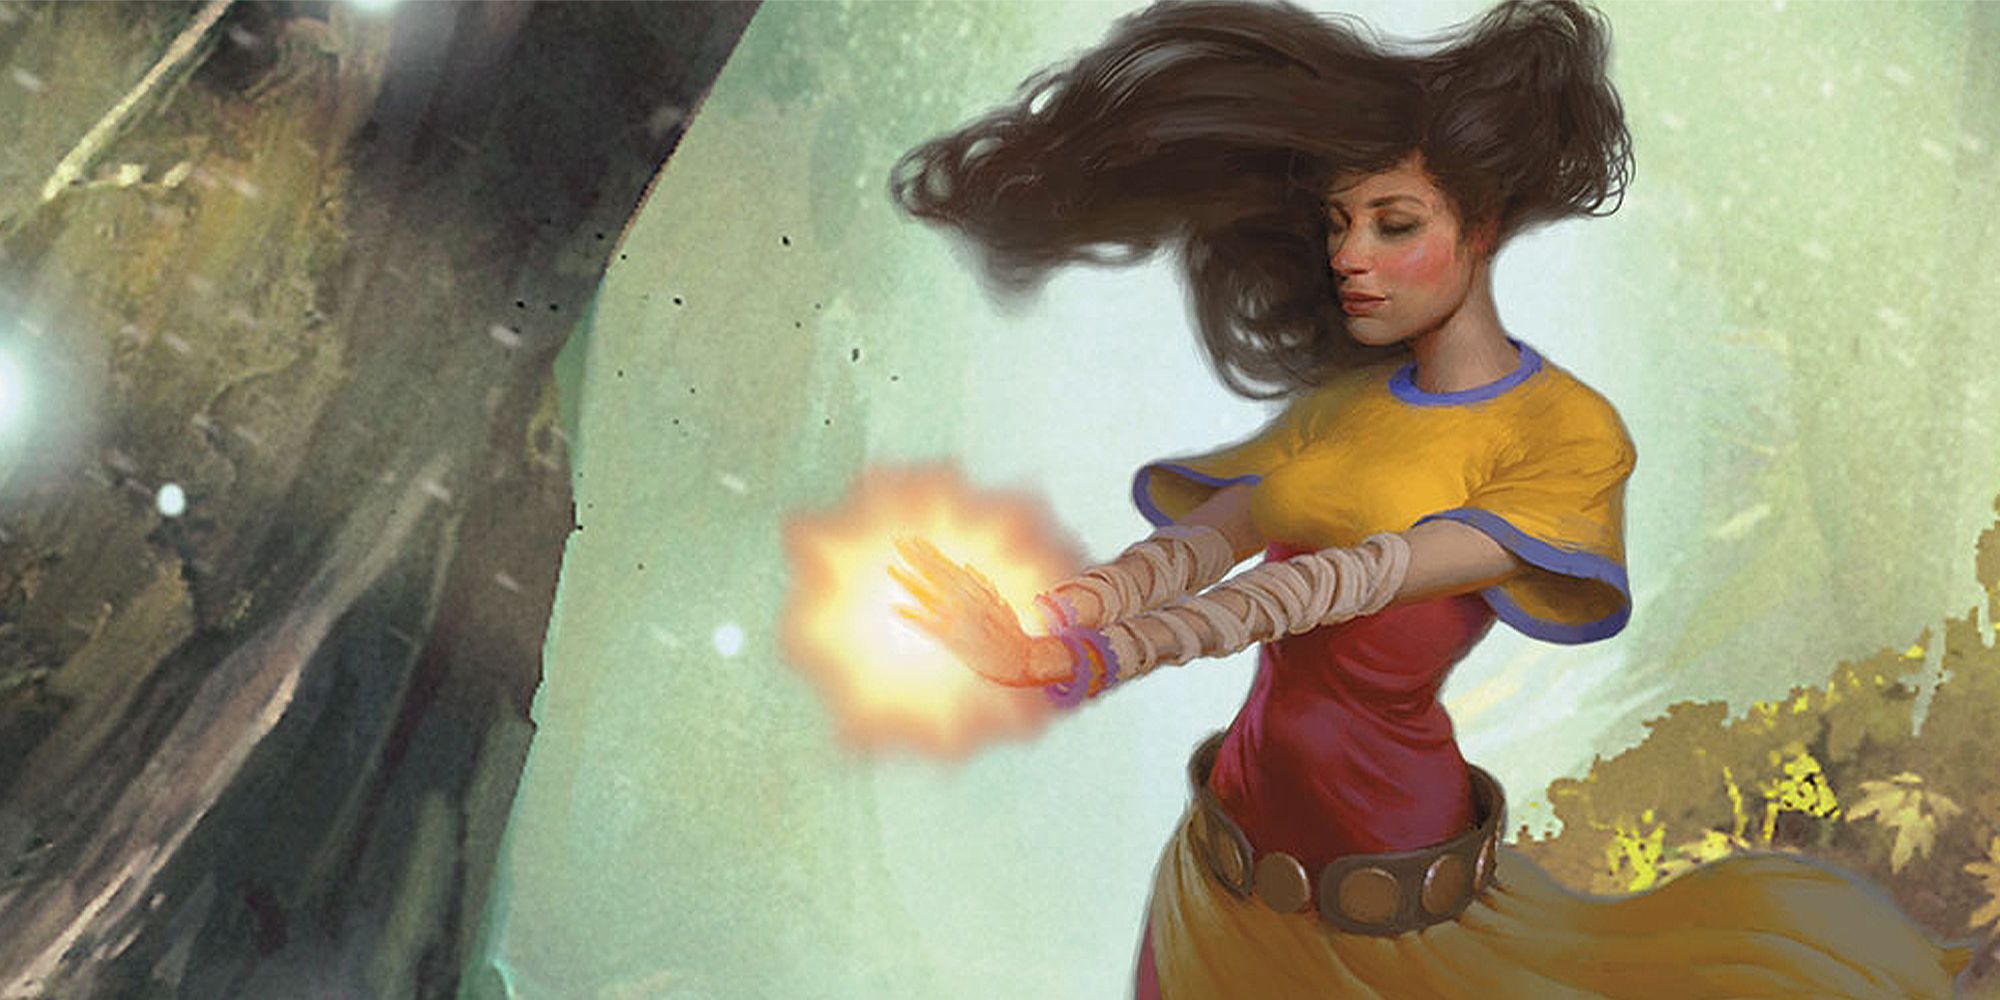 Artwork showing a female monk using her powers in D&D.